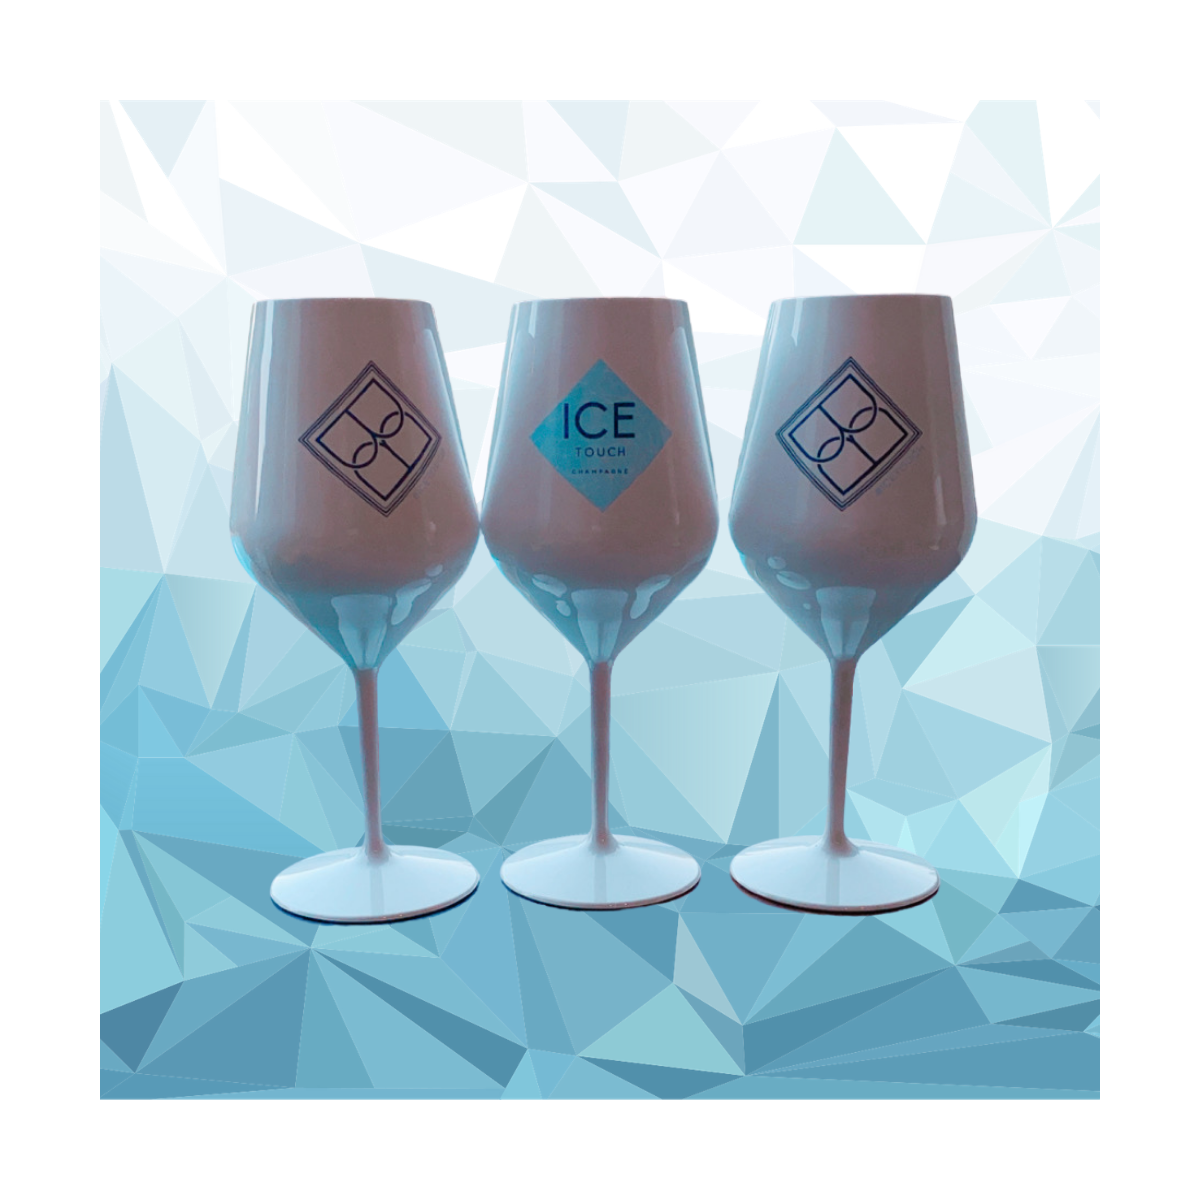 https://www.champagneboudebaudin.fr/869-thickbox_default/verres-a-cocktail-ice-touch.jpg